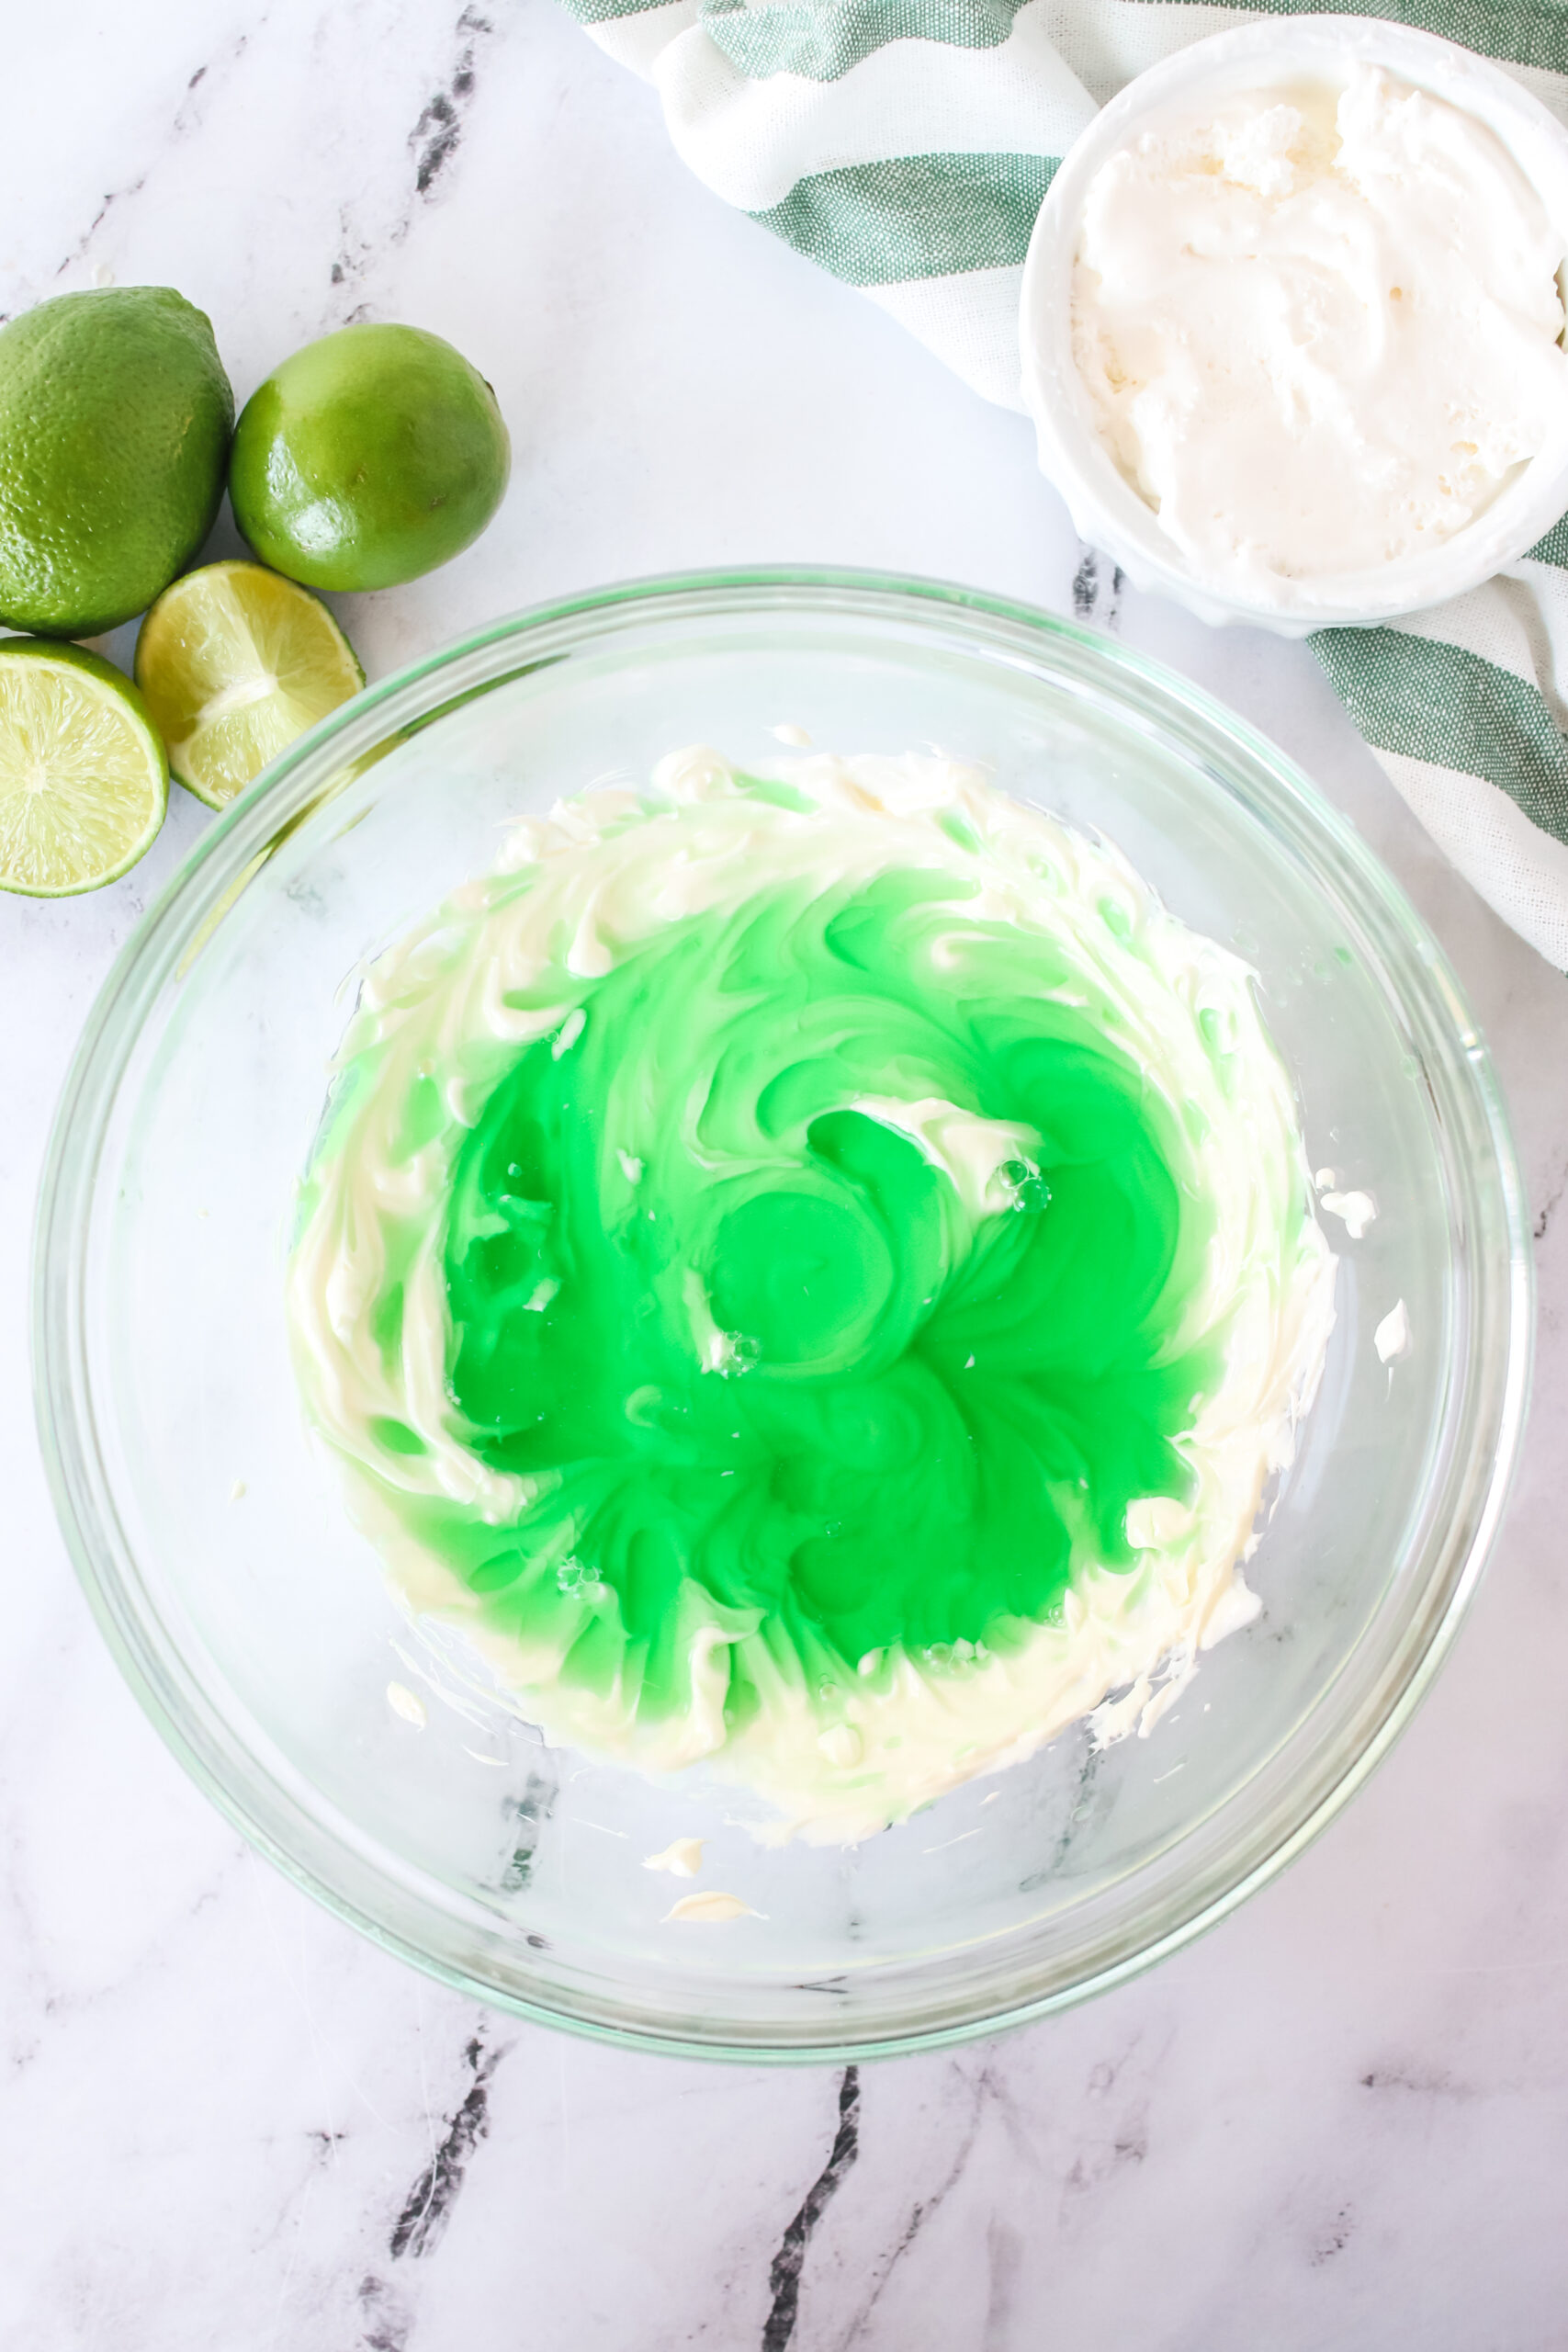 lime jello bein gadded to cream cheese